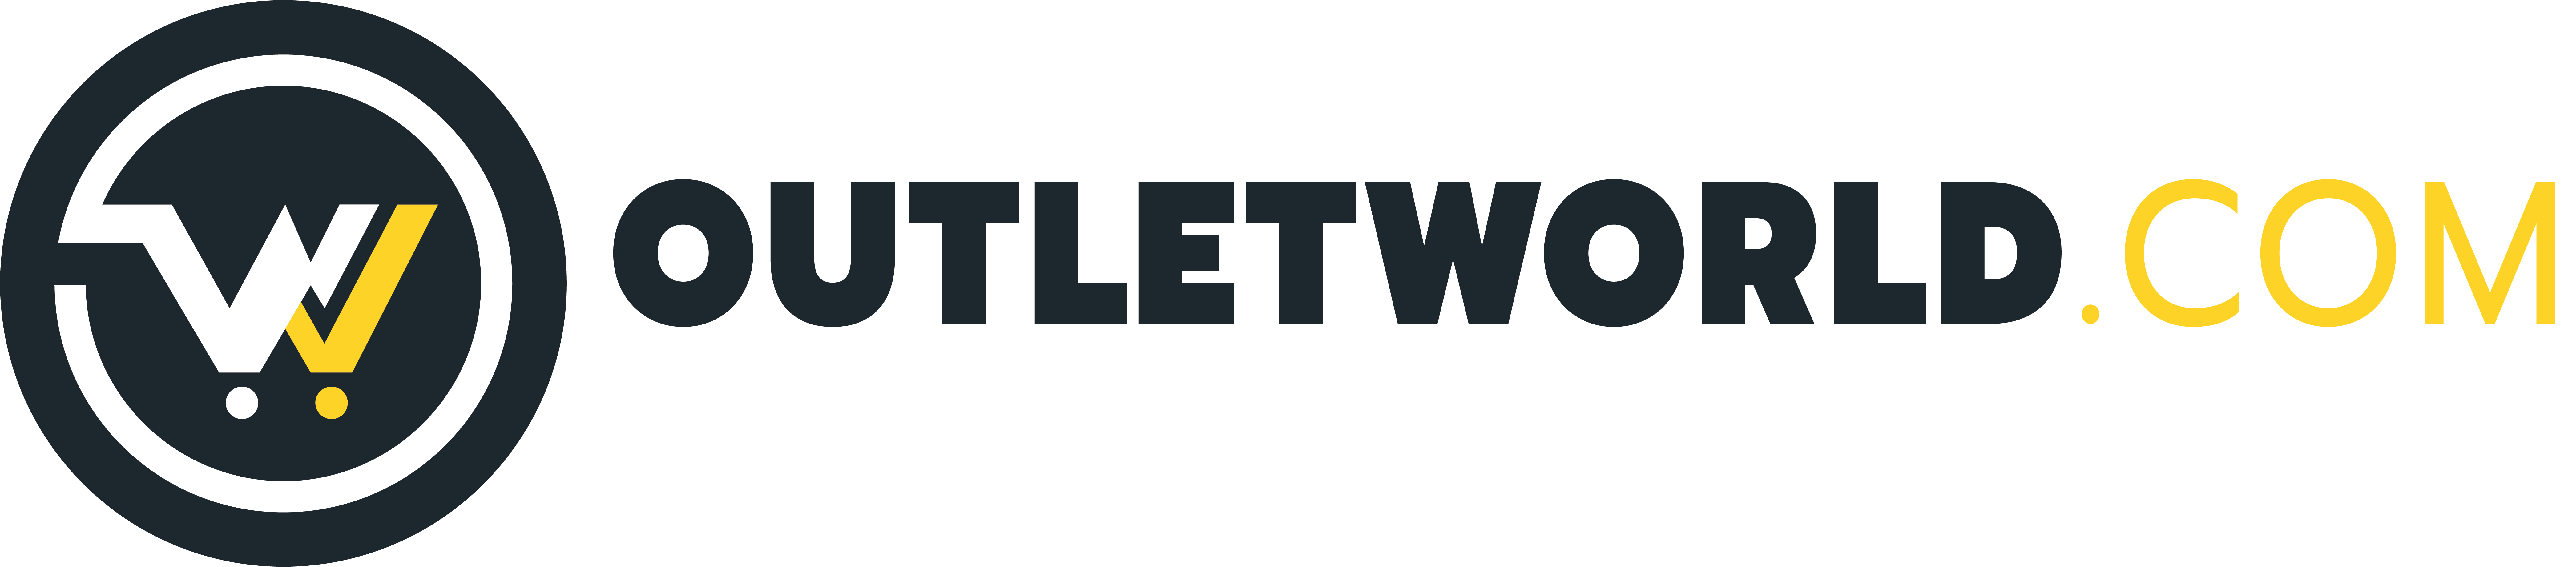 OUTLETWORLD STORE